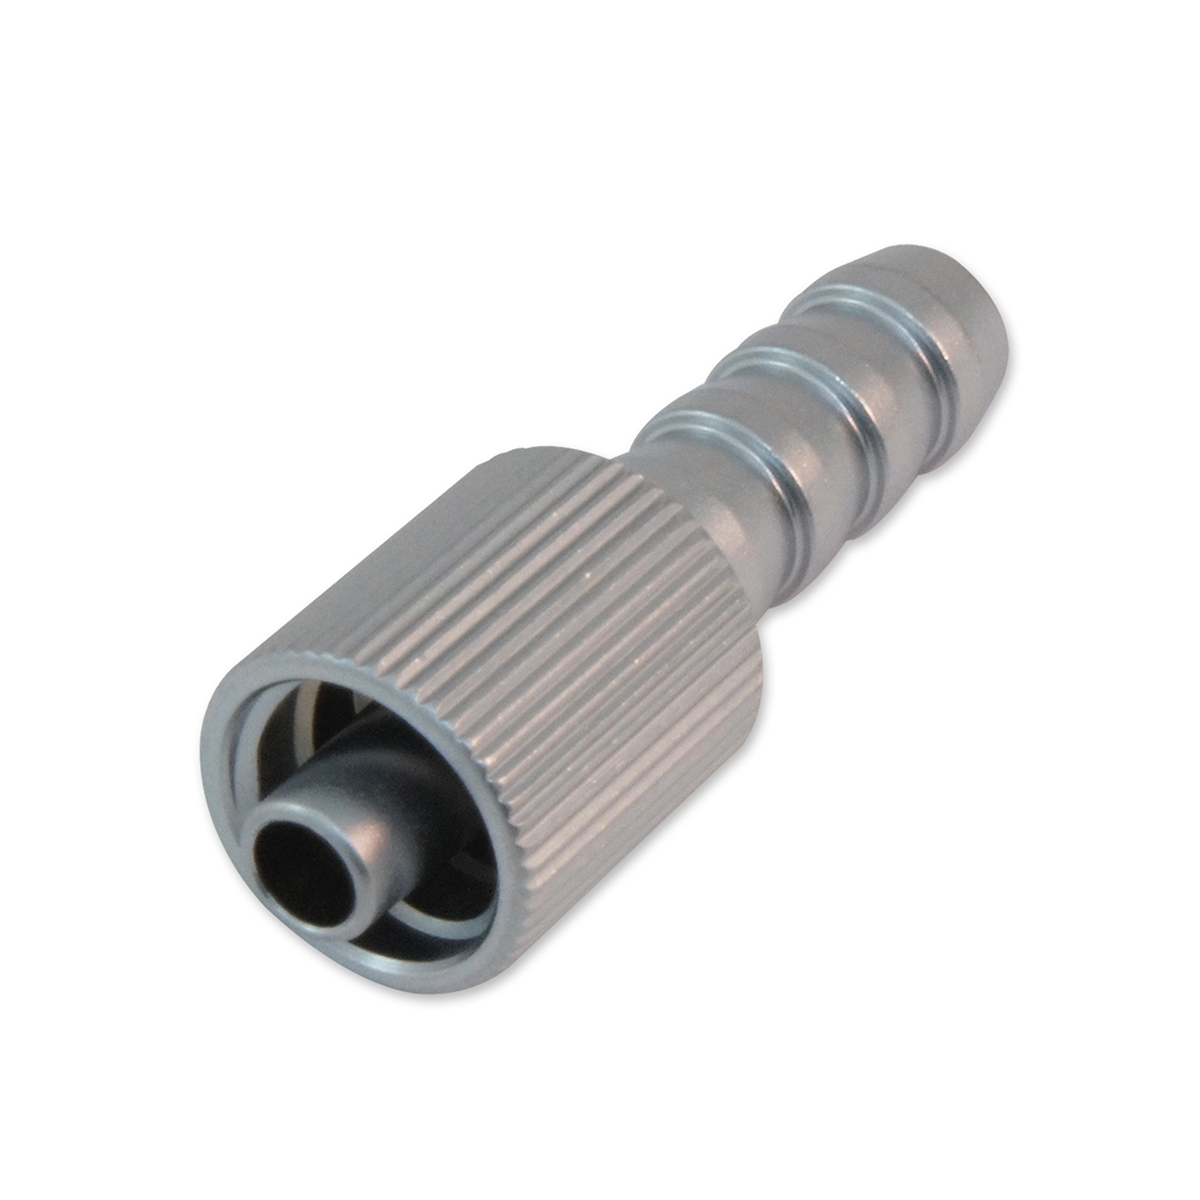 Tube connector rotatable Luer lock Image